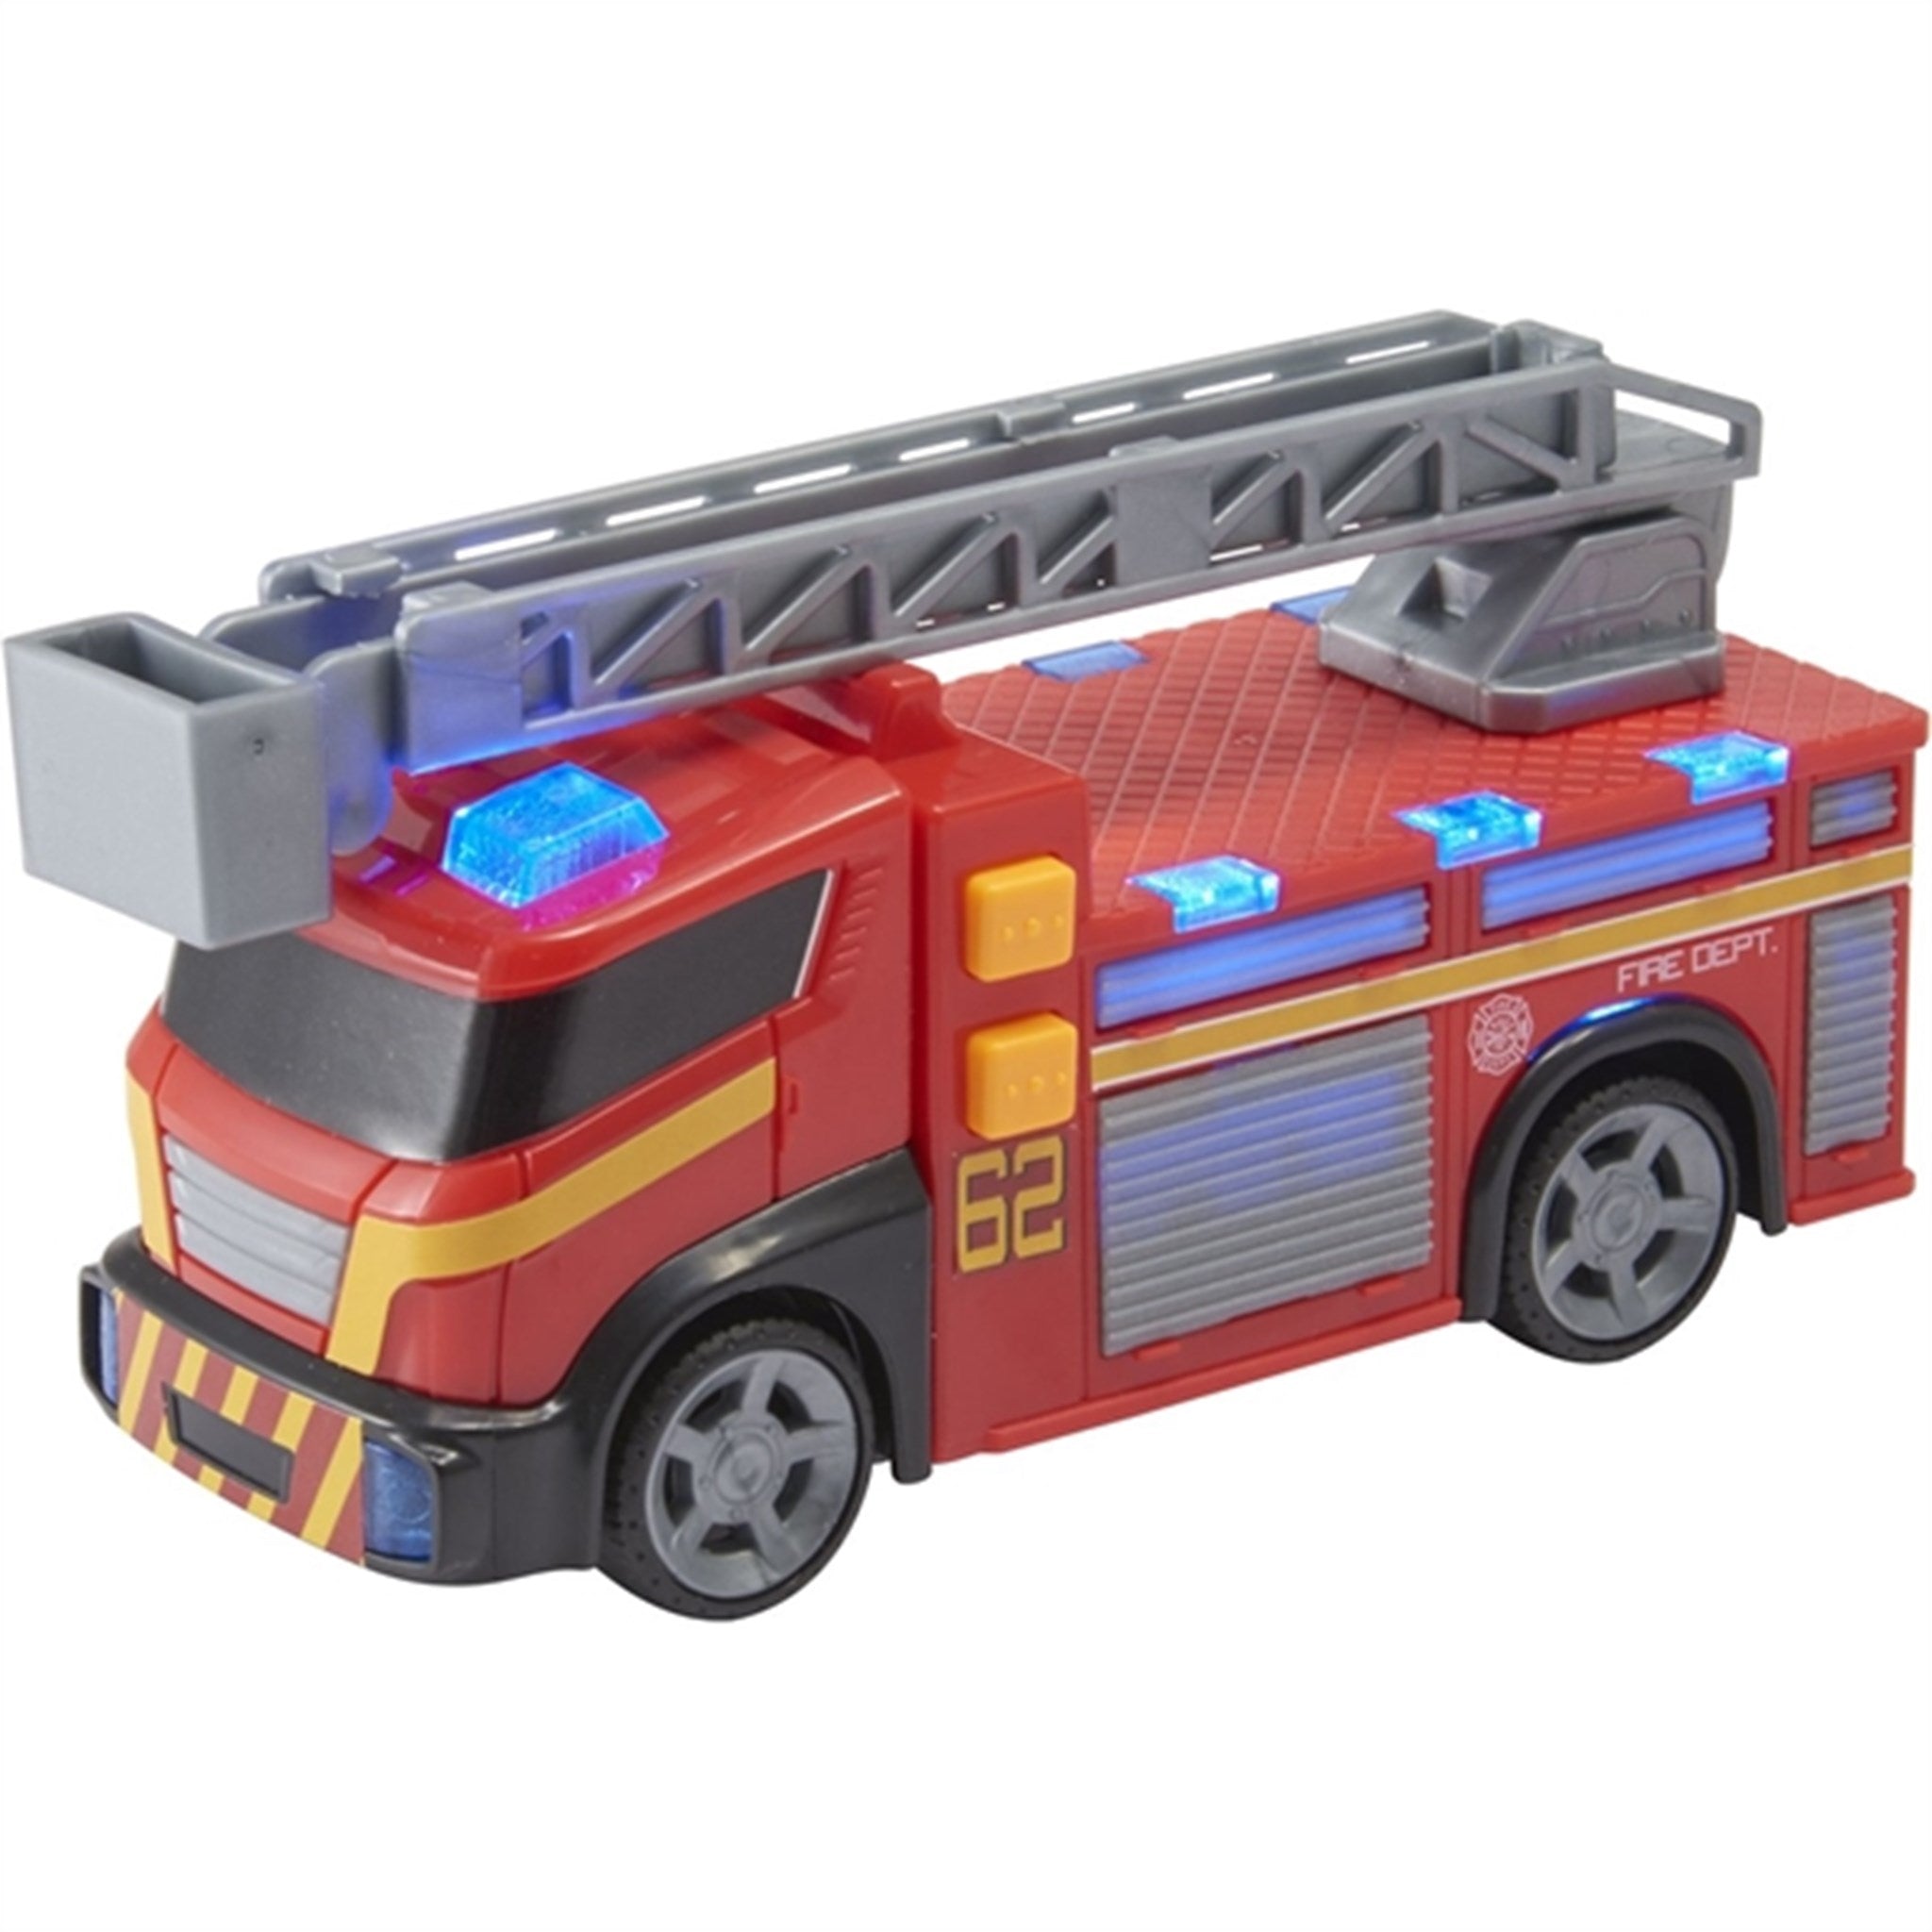 Teamsterz Small L&S Fire Engine